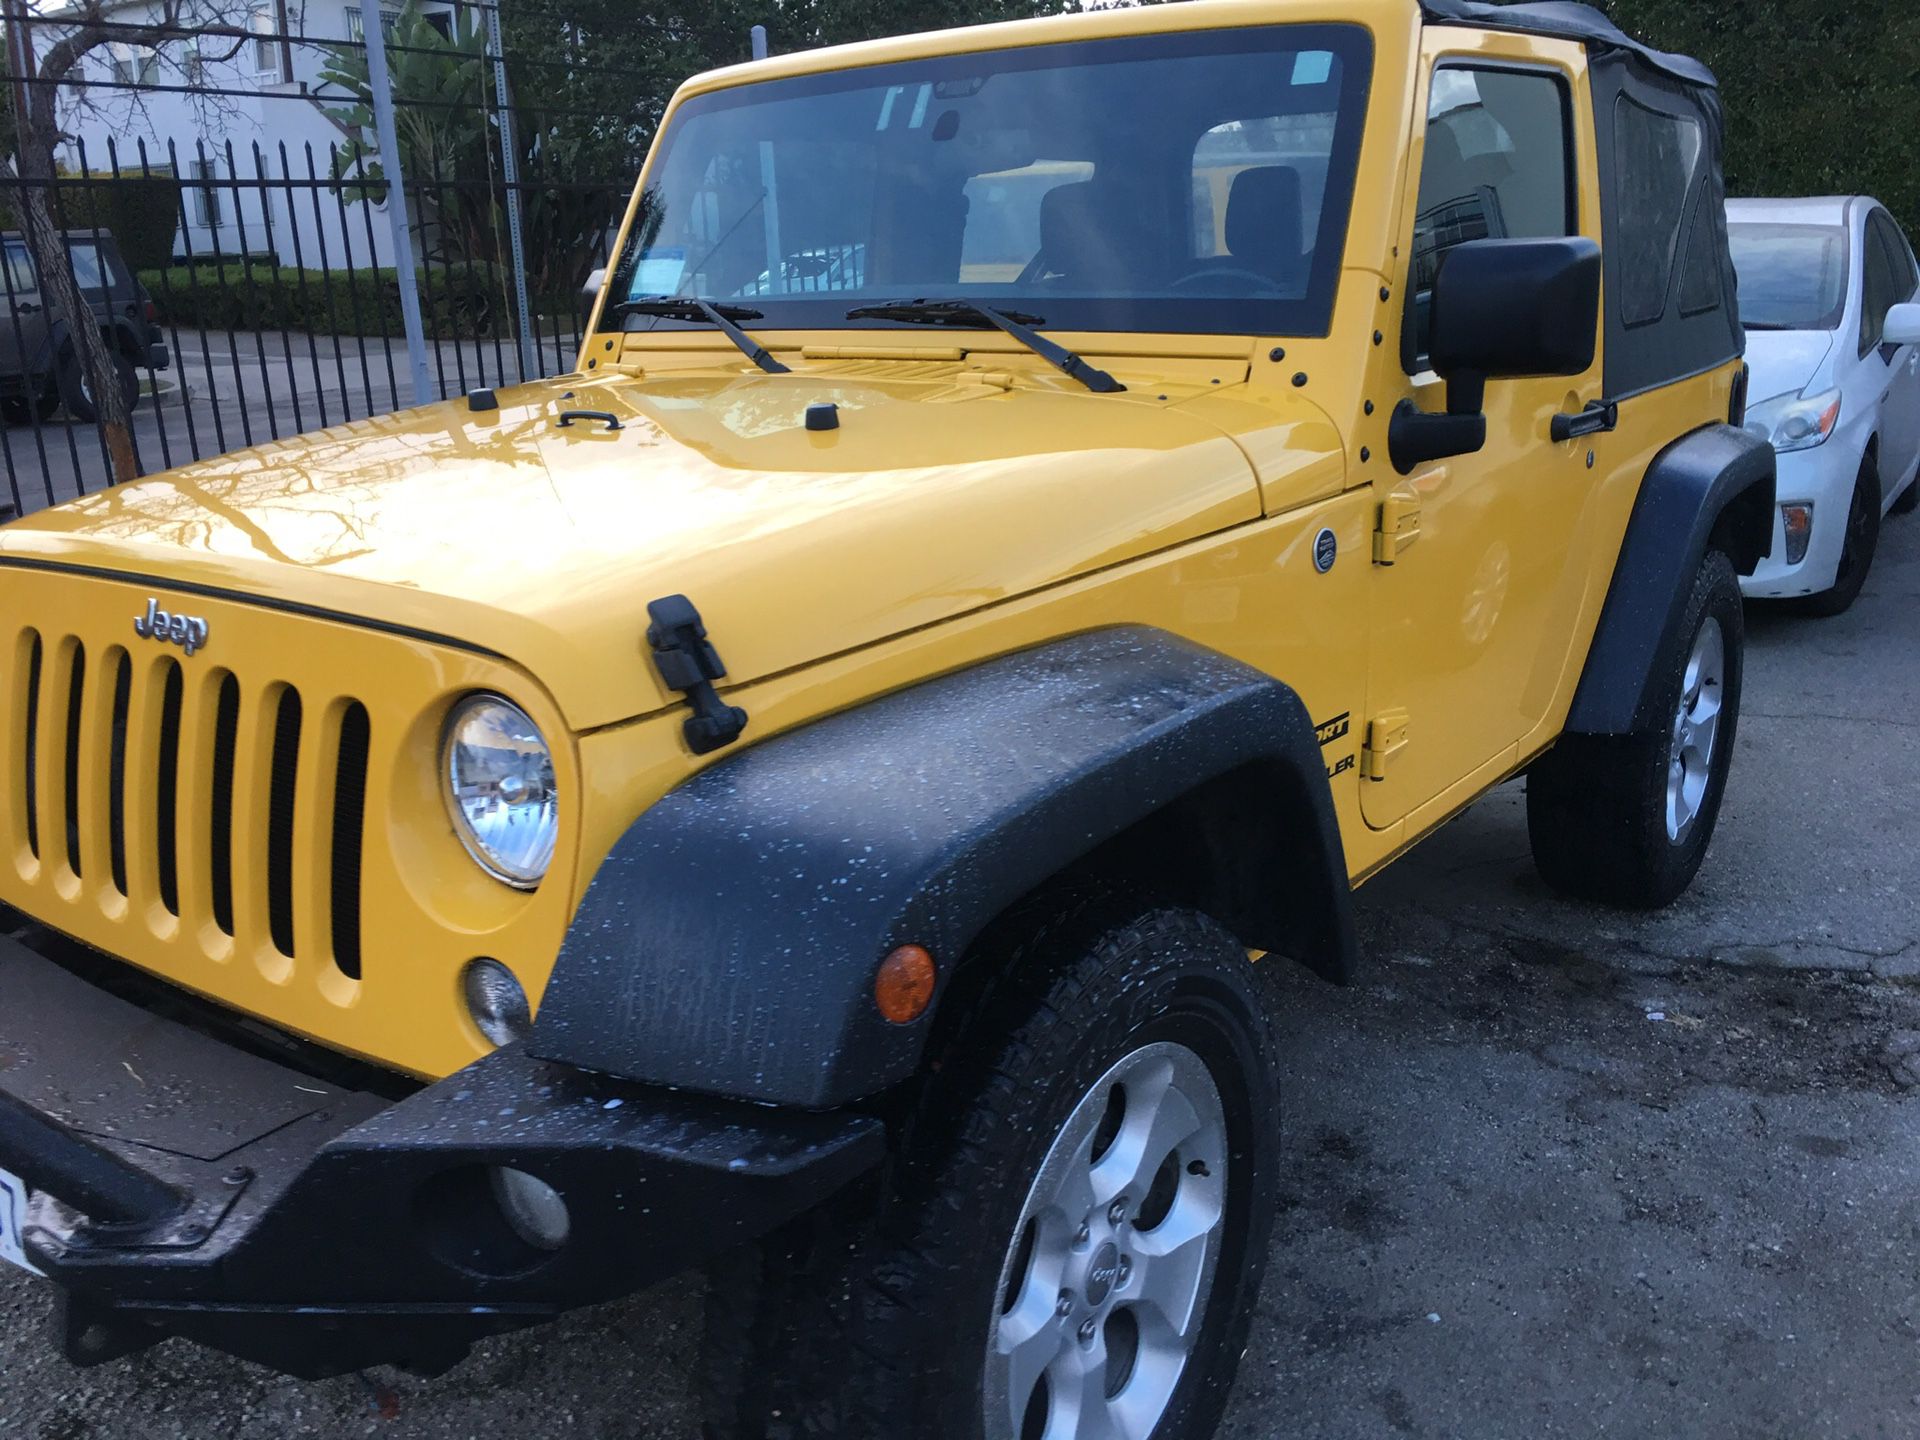 2015 Jeep Wrangler 4X4 6 Cyl 6 Spd only 29K Miles MP3 CD Player Never Been Off Road Original Owner always serviced must sell $22,900